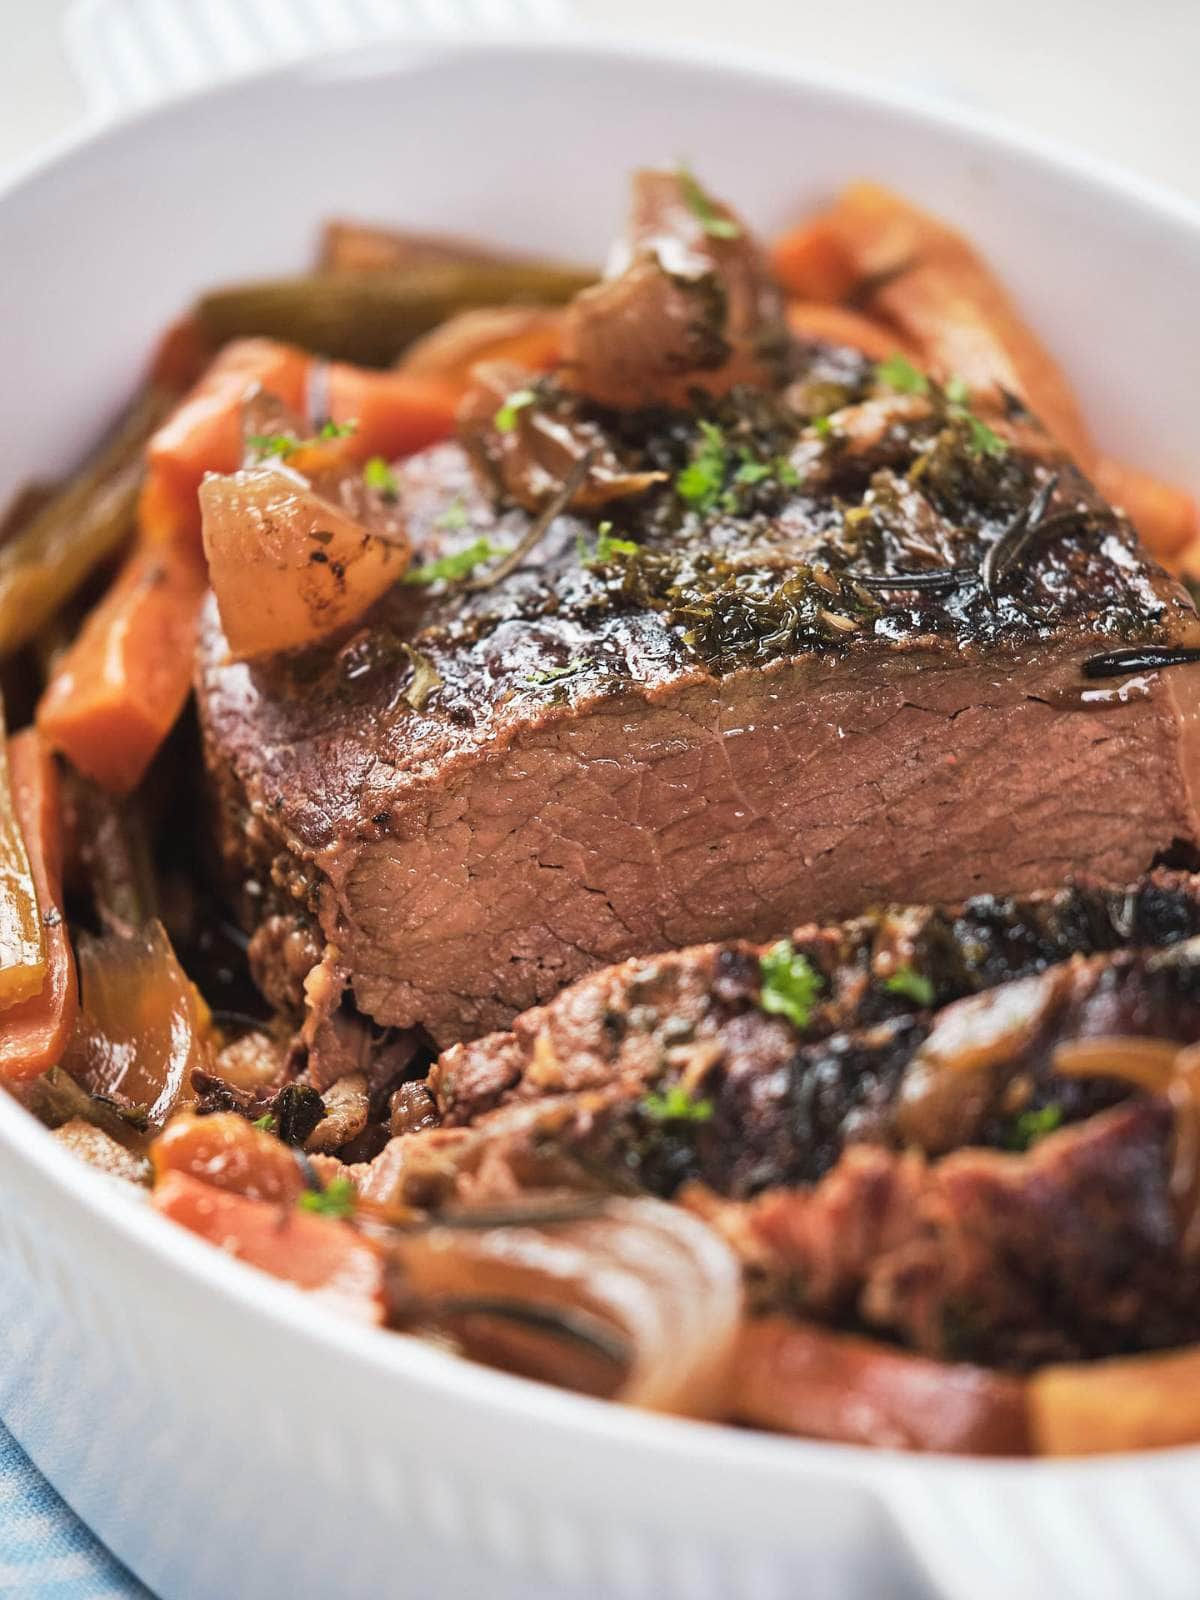 A close-up image of a keto beef pot roast with carrots and onions in a white dish.